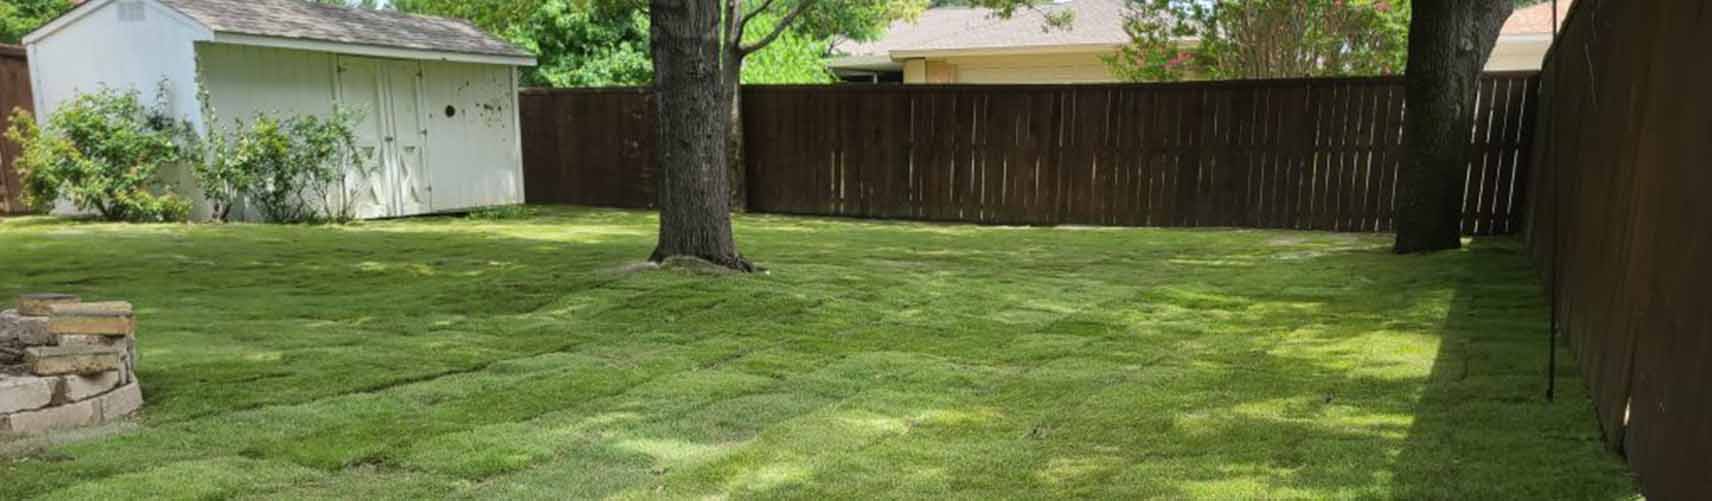 Lewisville Landscaping Company, Lawn Care Services and Landscaper